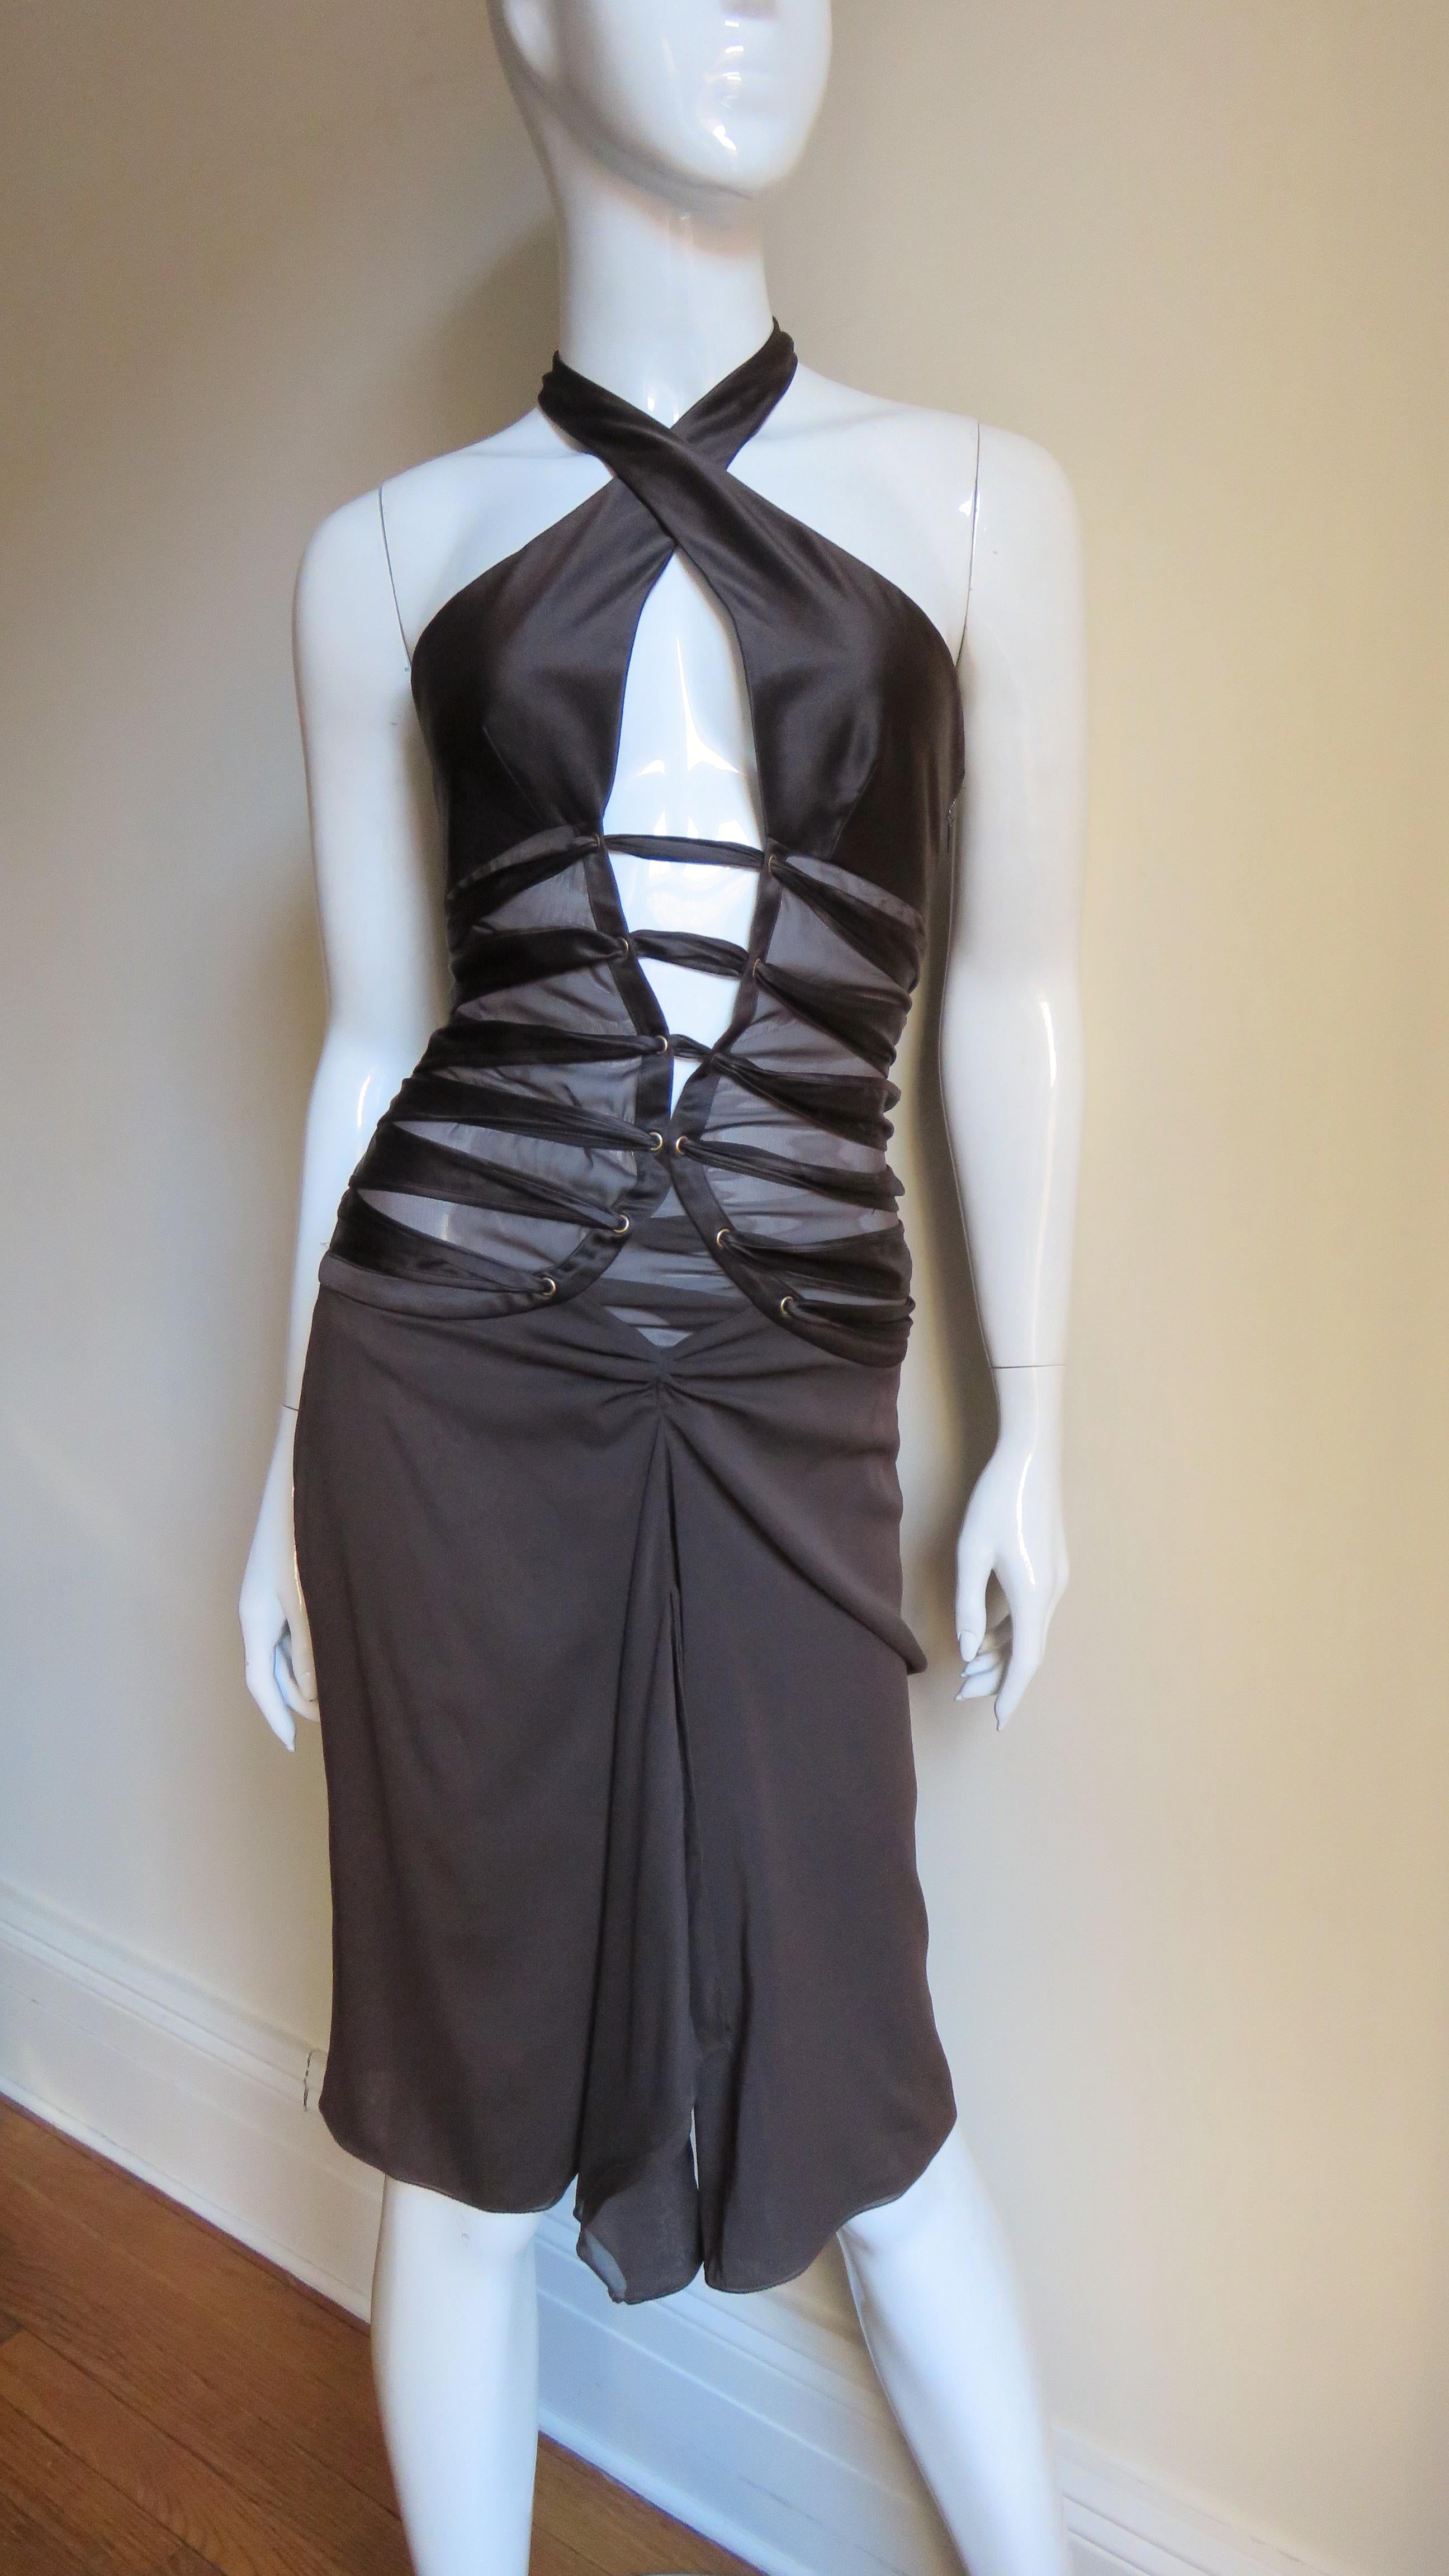 This is a gorgeous rich chocolate brown silk halter dress by Tom Ford for Gucci.  It has a deep plunging front crossing halter neckline sheer on the sides below the bust, bare at the back to below the waist except for rows of horizontal straps